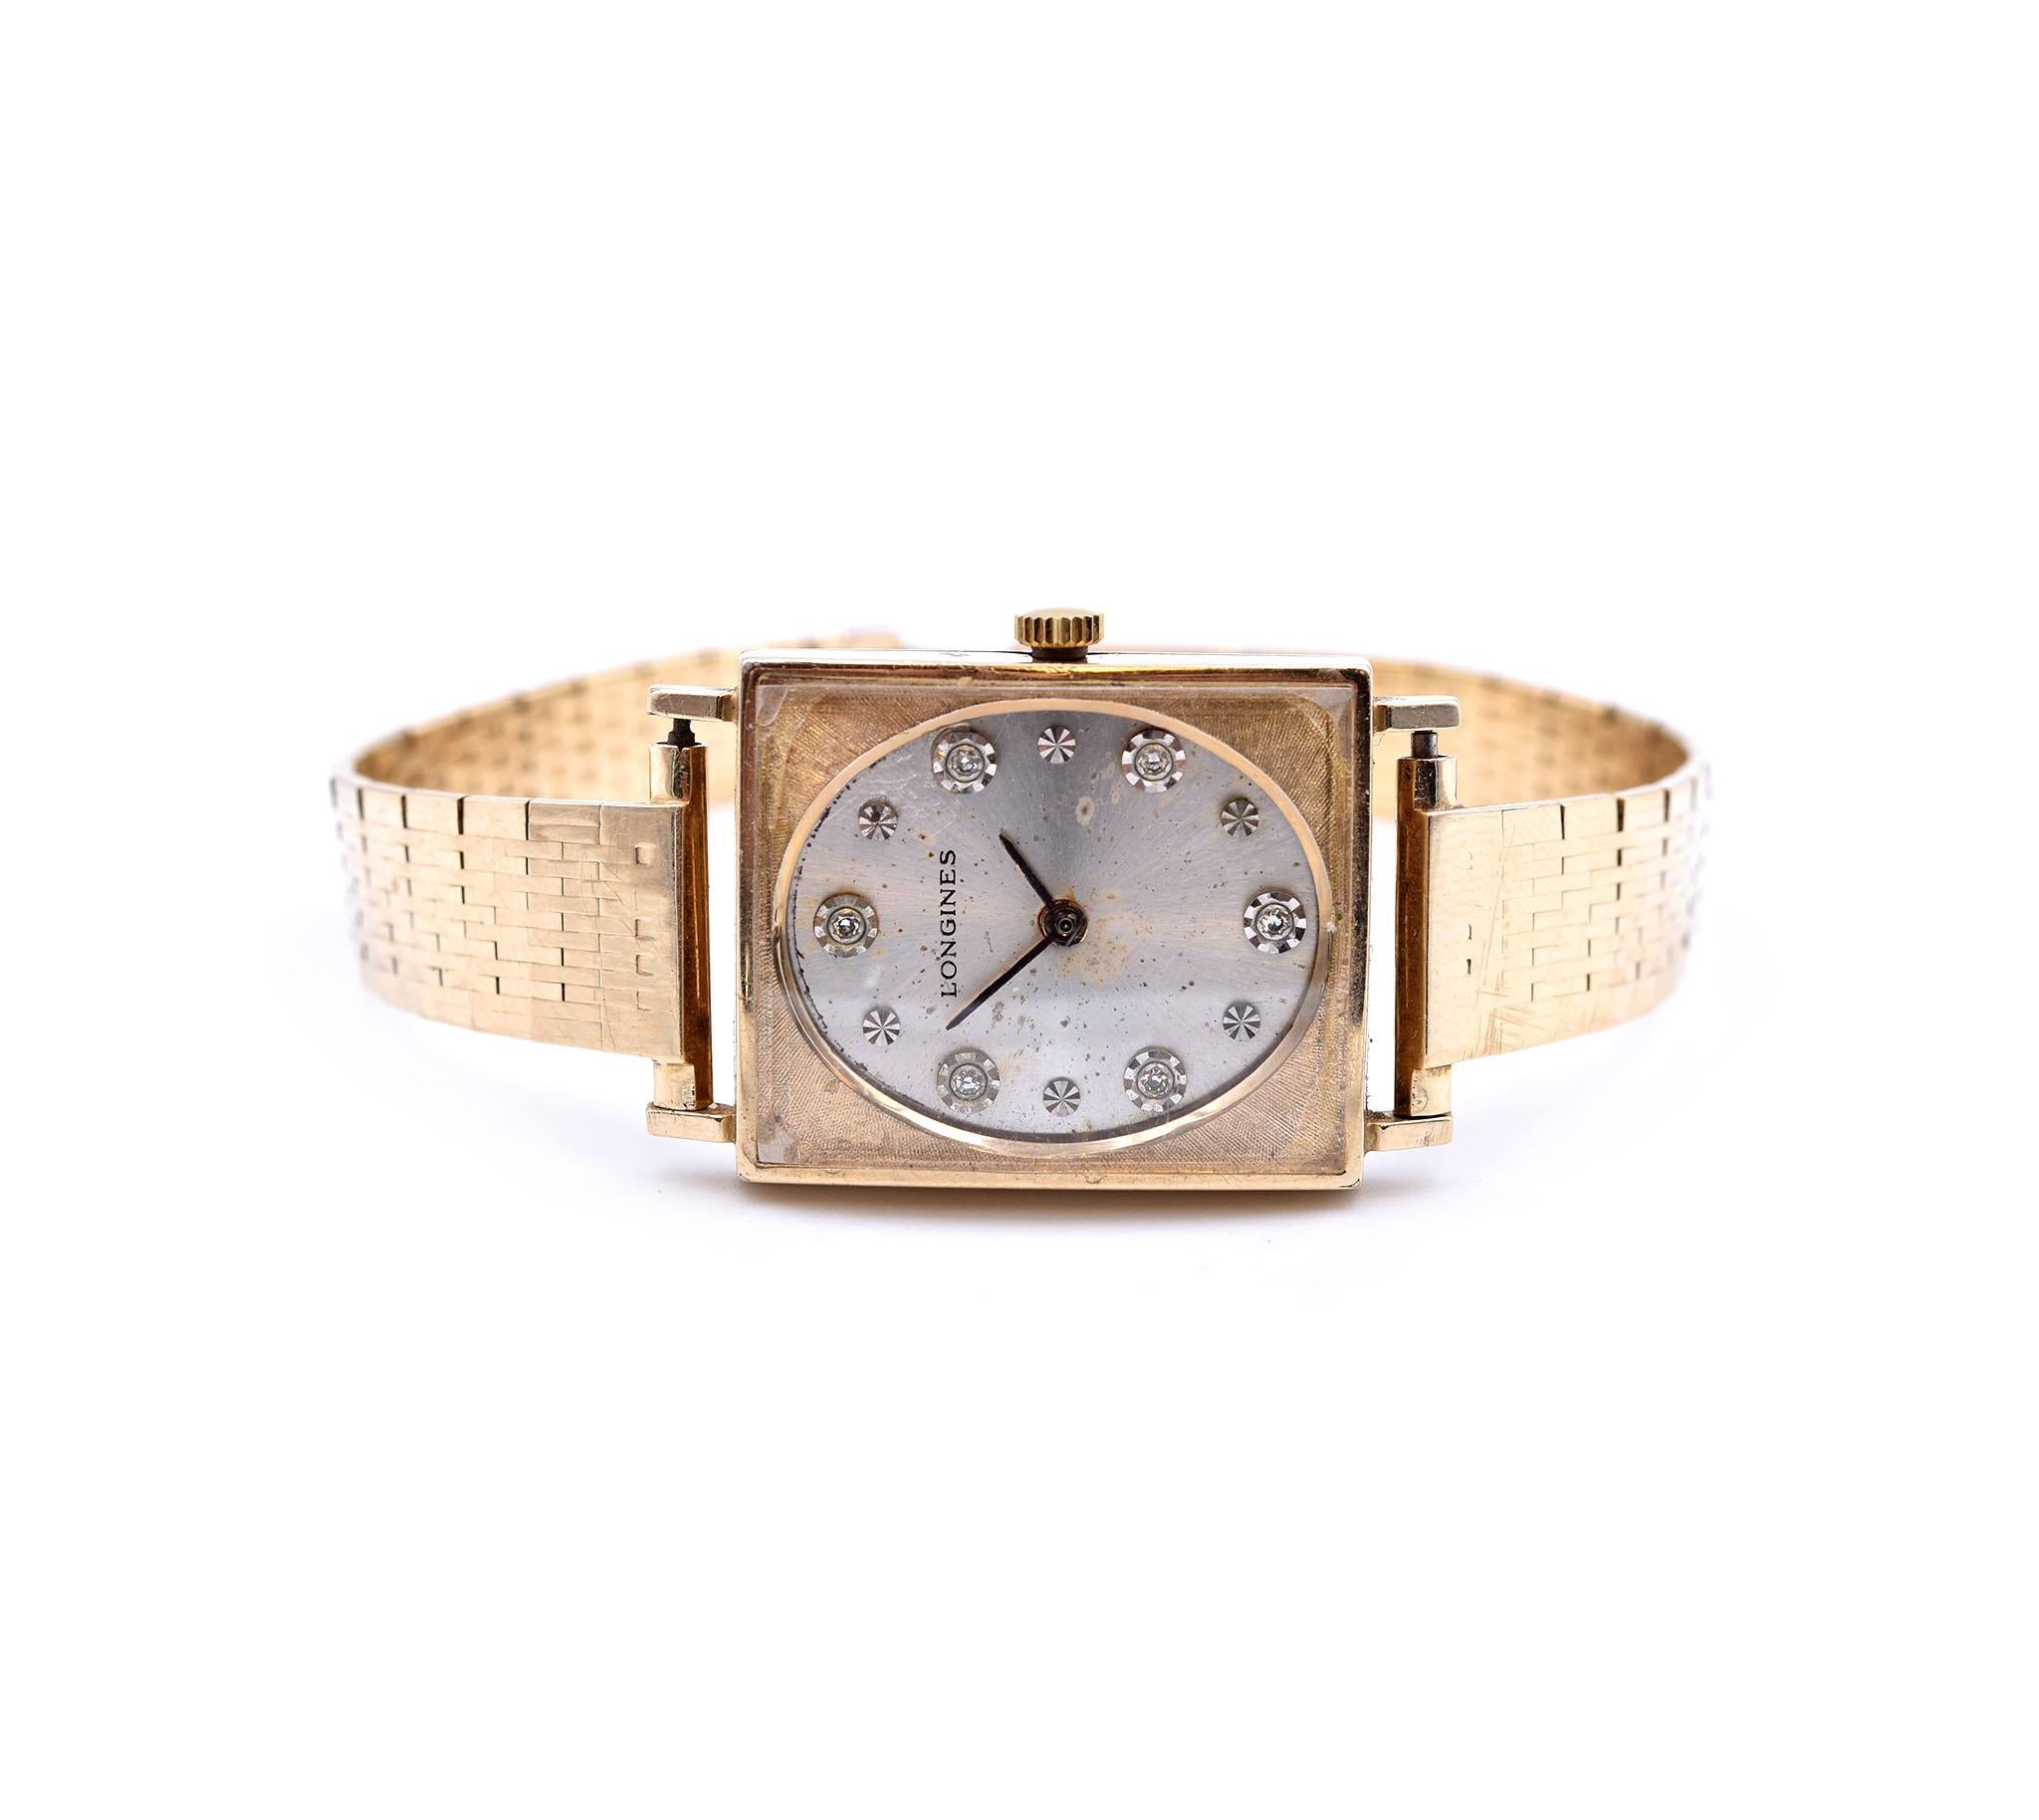 longines 10k gold filled watch value